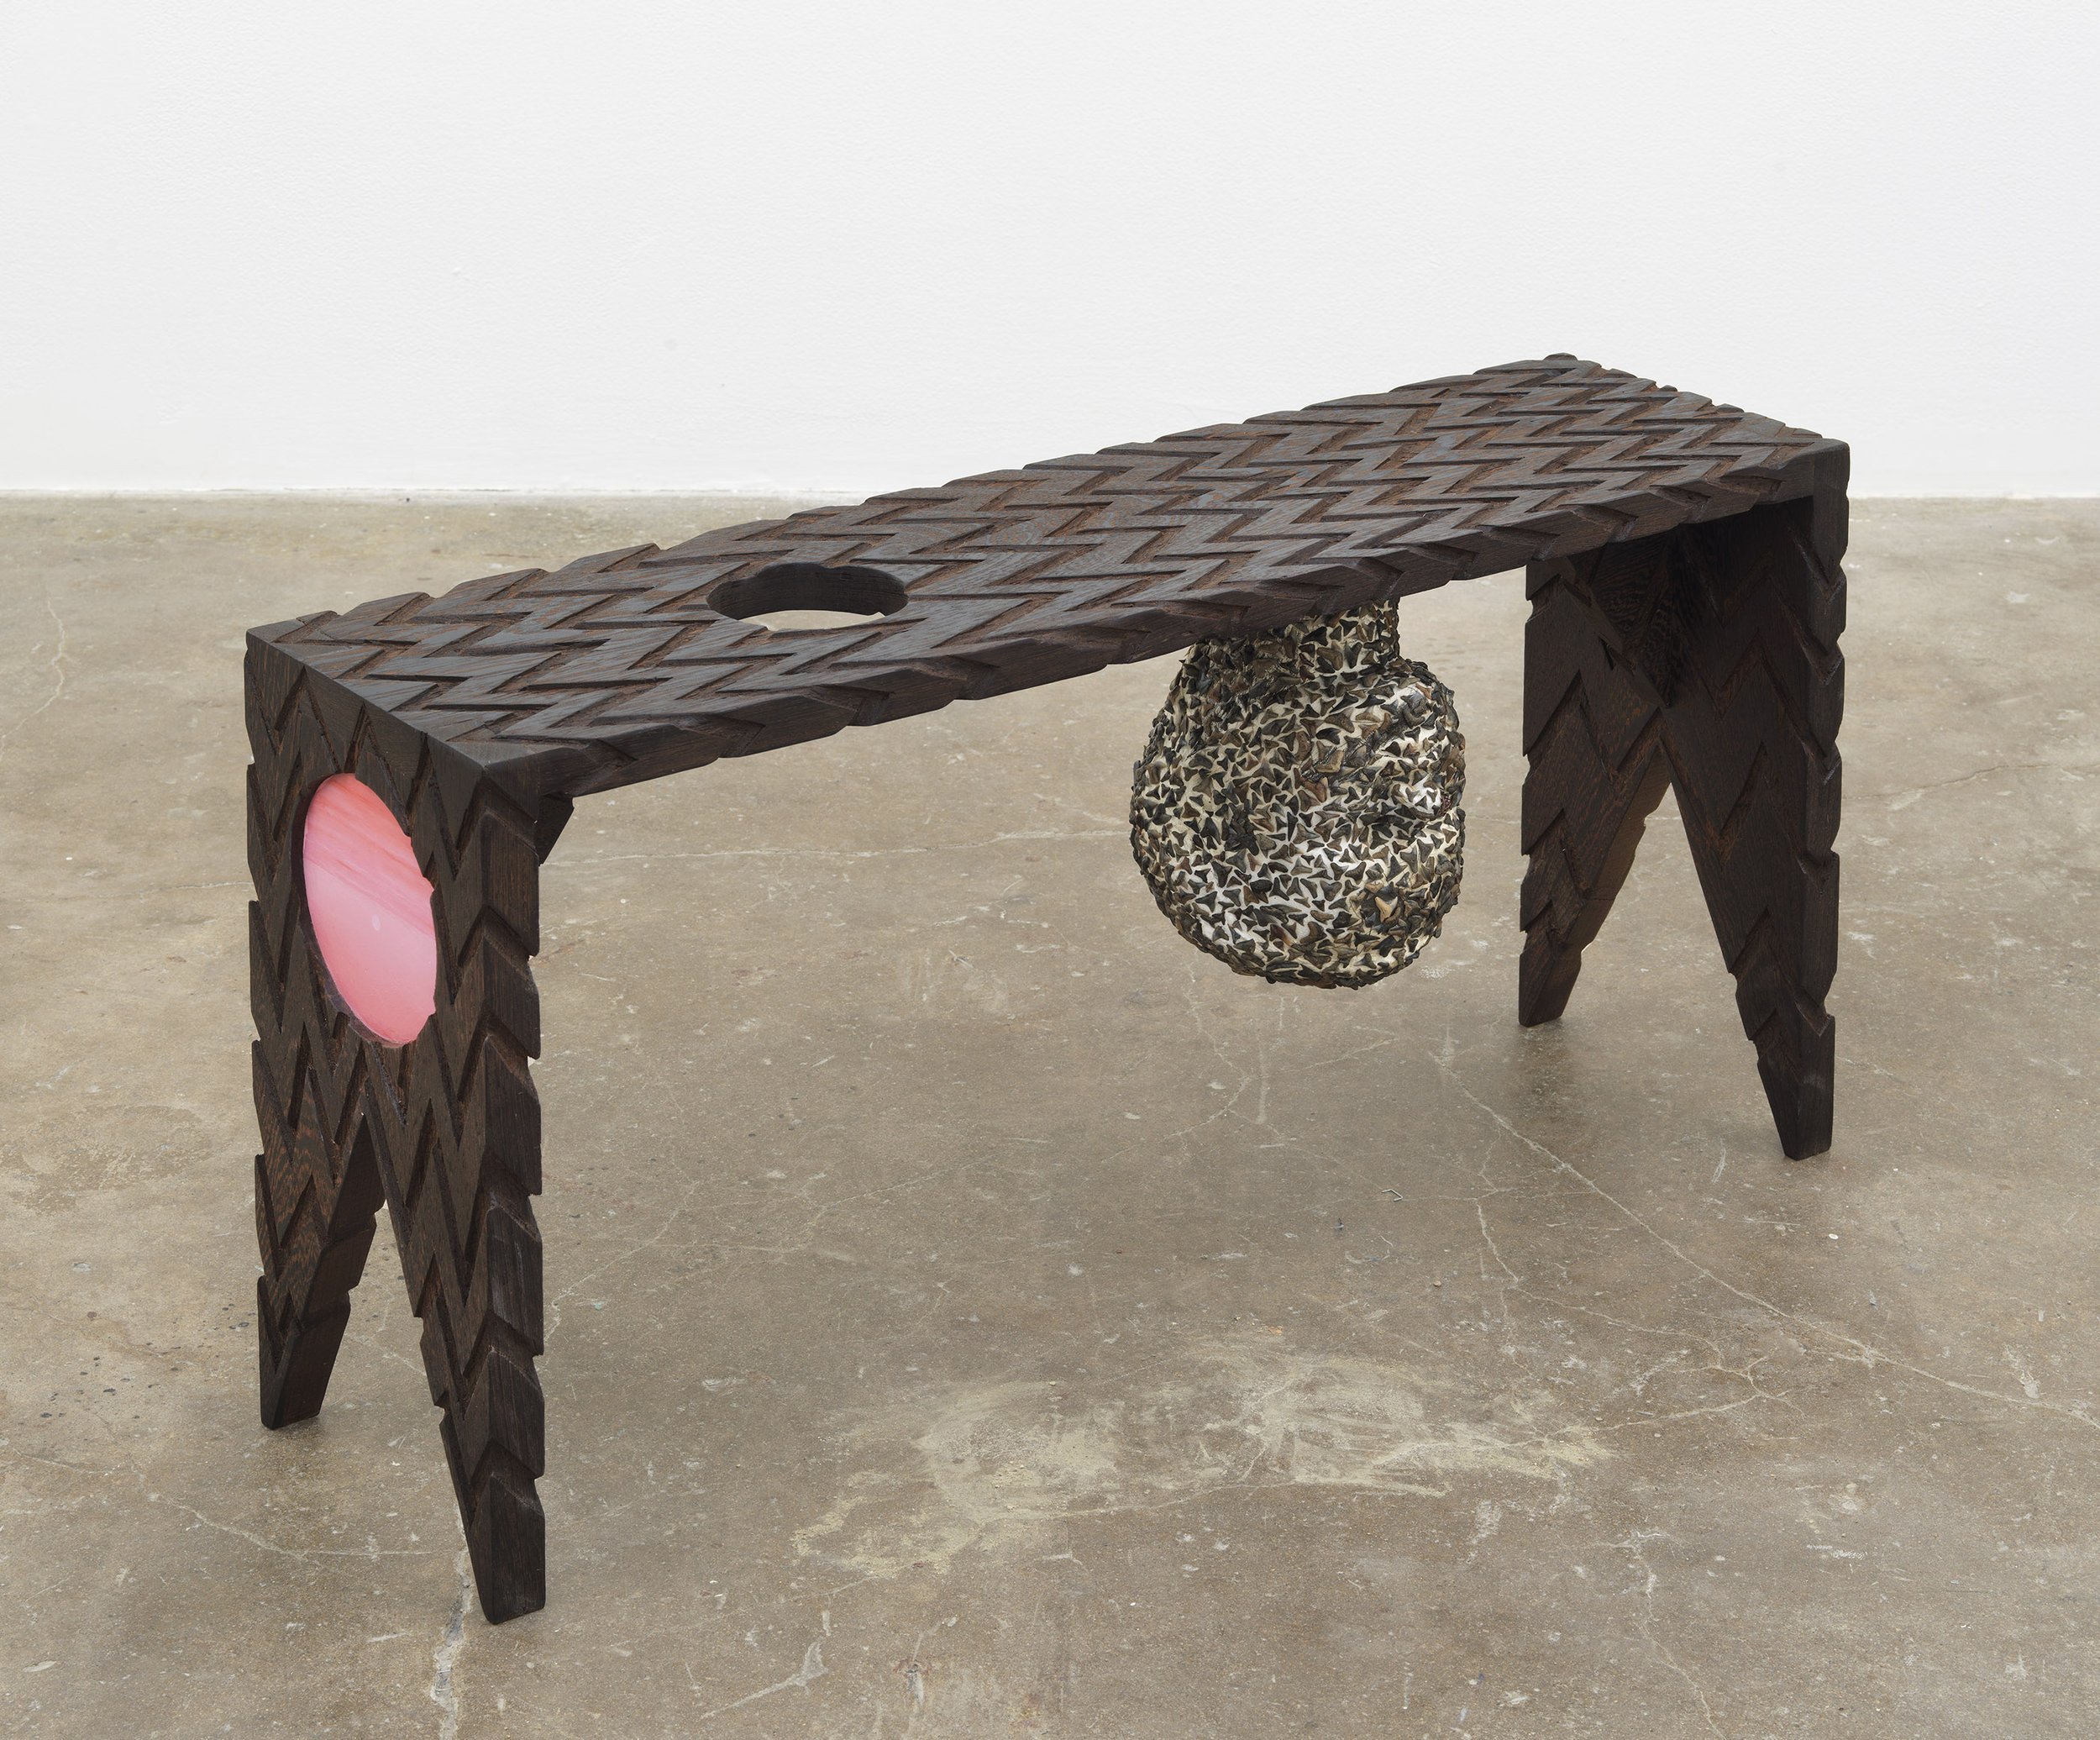   Nether Eye Looking Bench , 2020, fossils, pencil, acrylic, oil, and found objects on carved wenge, 17” x 31.5” x 8.5” 